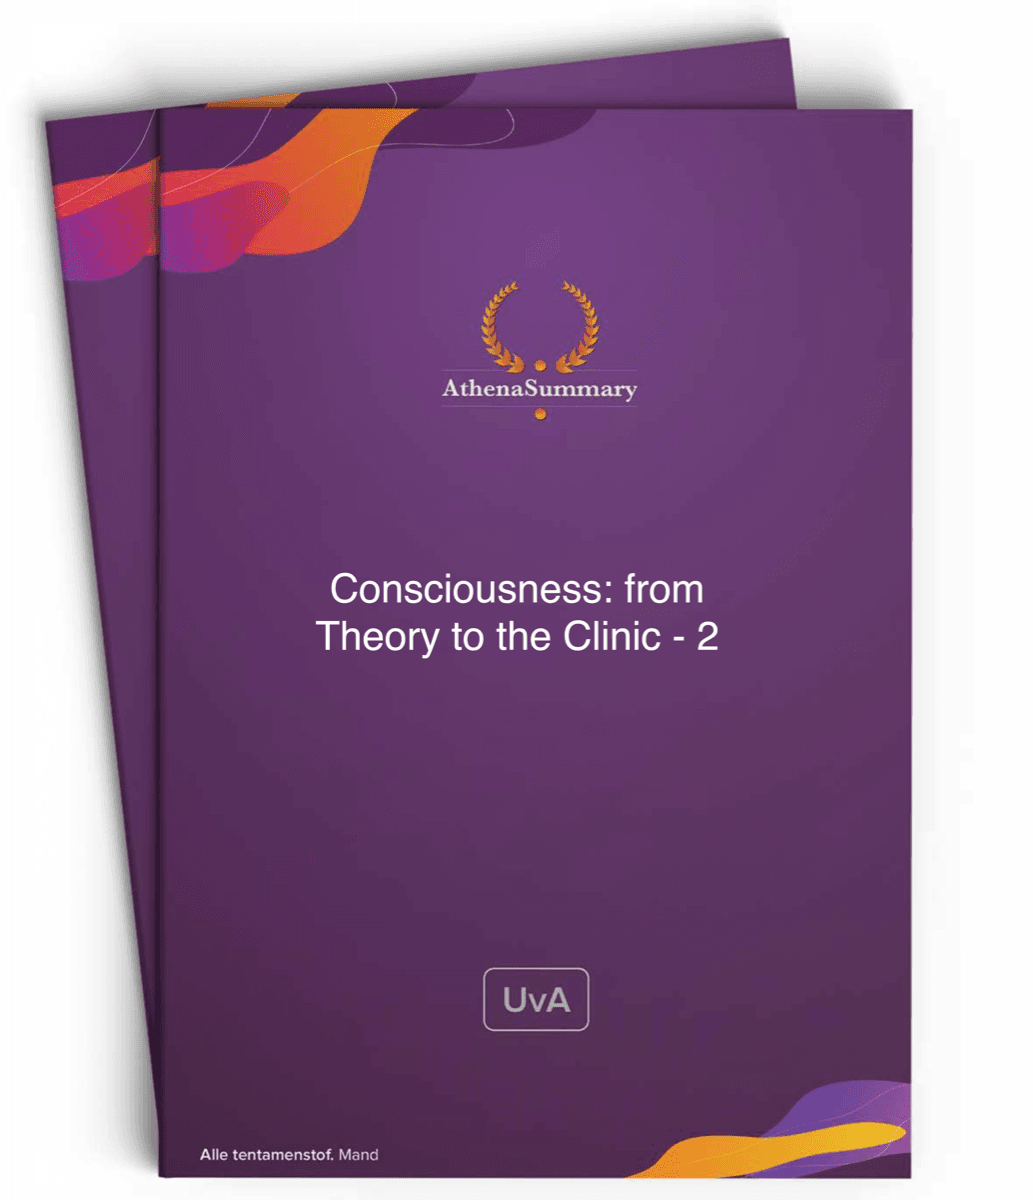 Literature Summary: Consciousness: from Theory to the Clinic - 2